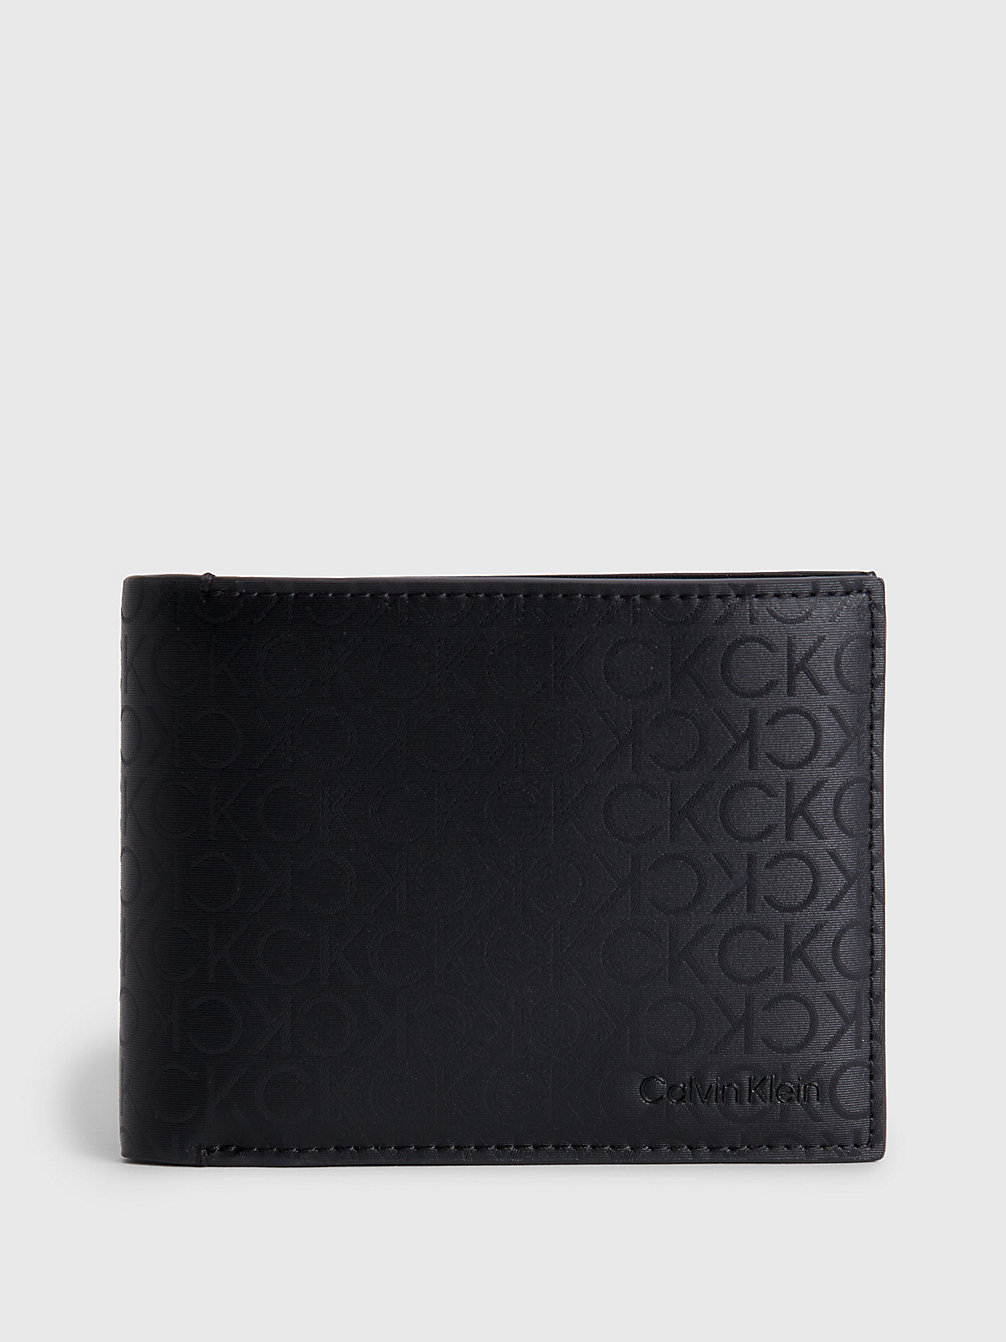 INDUSTRIAL MONO BLACK Recycled Rfid Trifold Wallet undefined men Calvin Klein